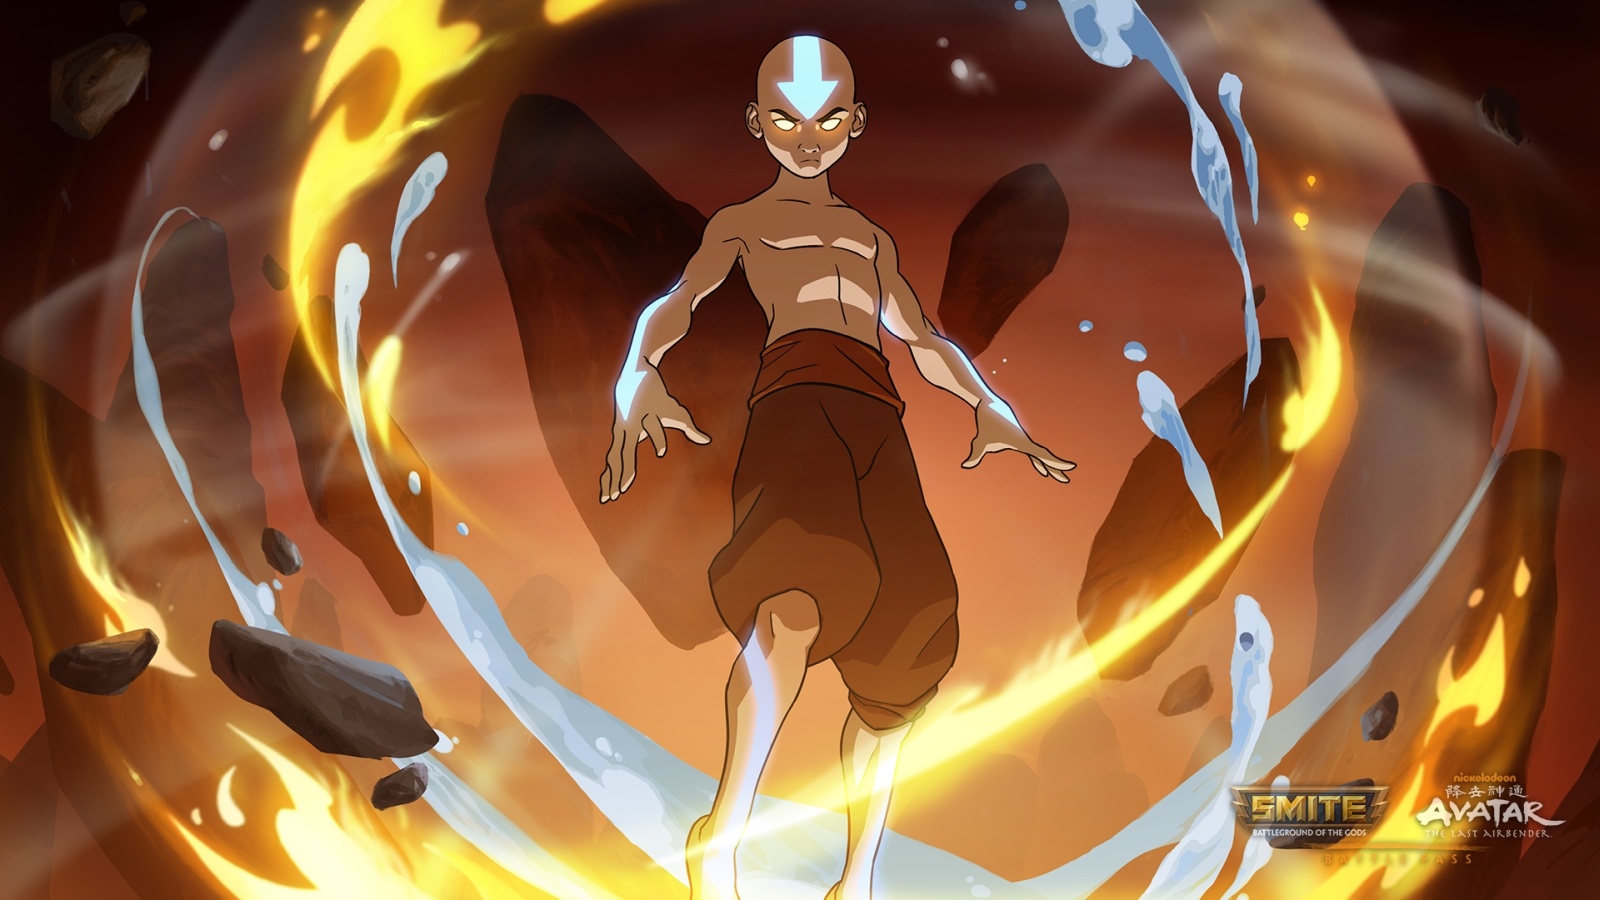 Aang The last fight  Avatar the last airbender art Avatar picture The last  avatar